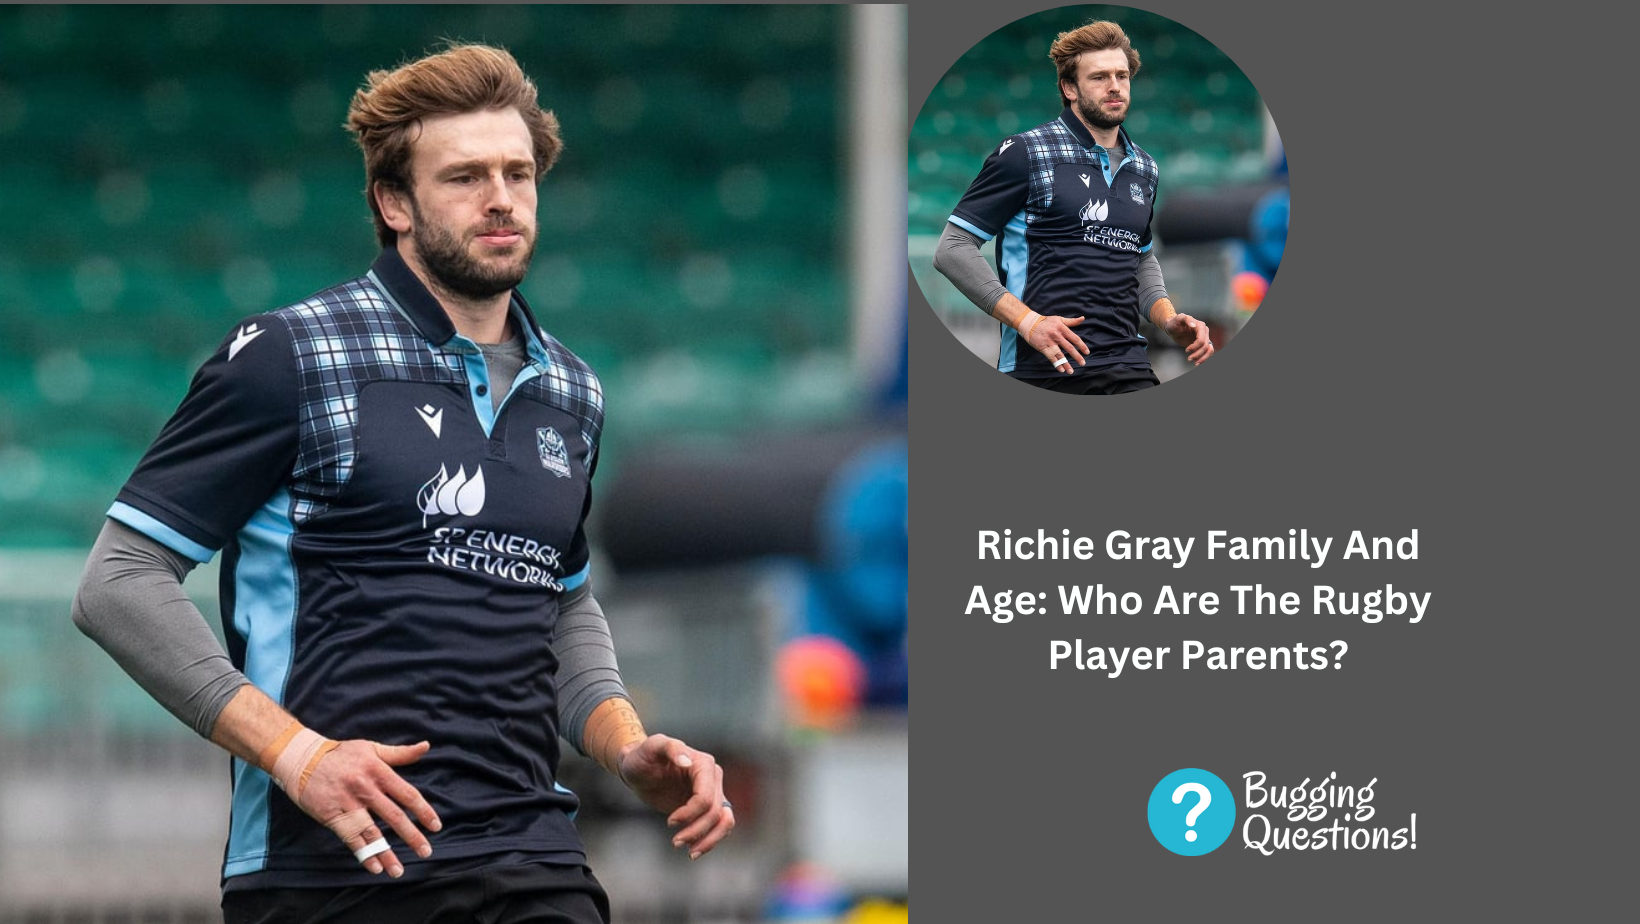 Richie Gray Family And Age: Who Are The Rugby Player Parents?